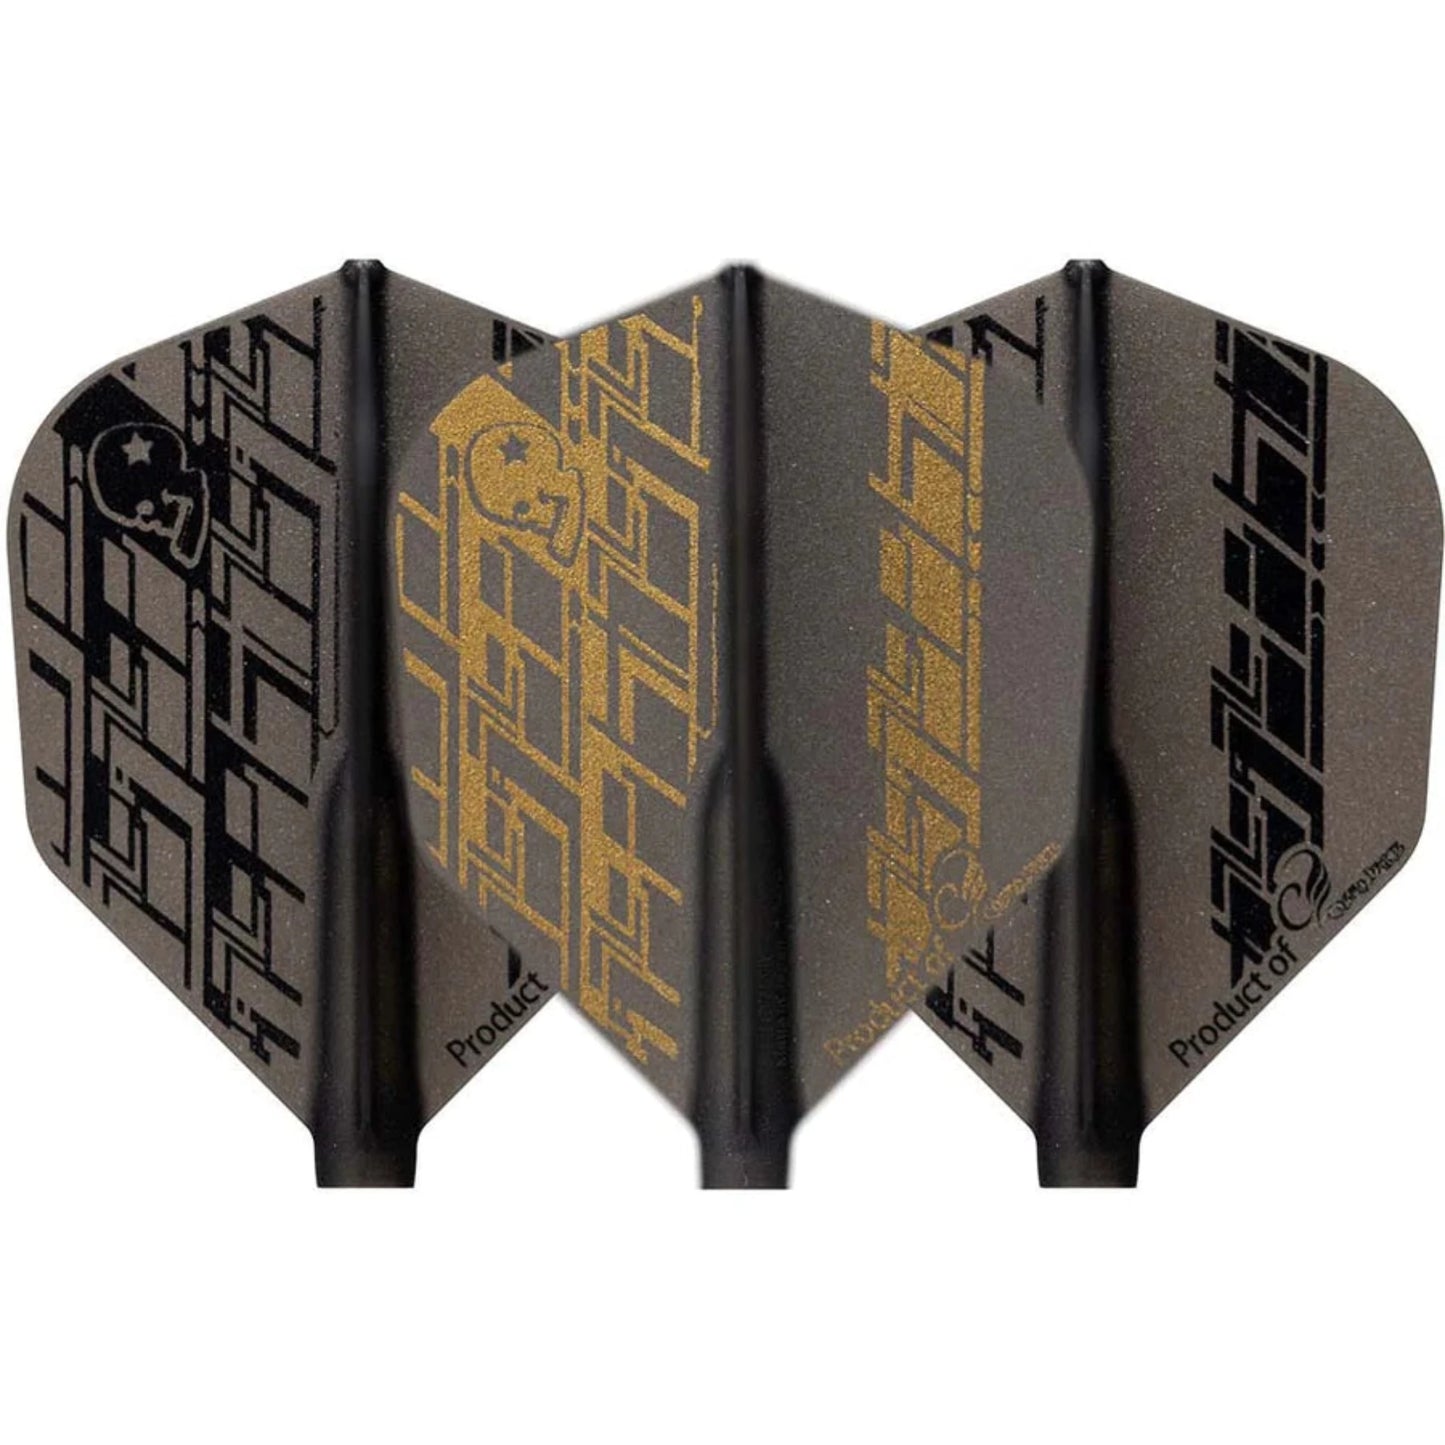 Shin Higashida V2 Fit Flights Dart Flights in black with gold accents, showcasing durable and stable design.